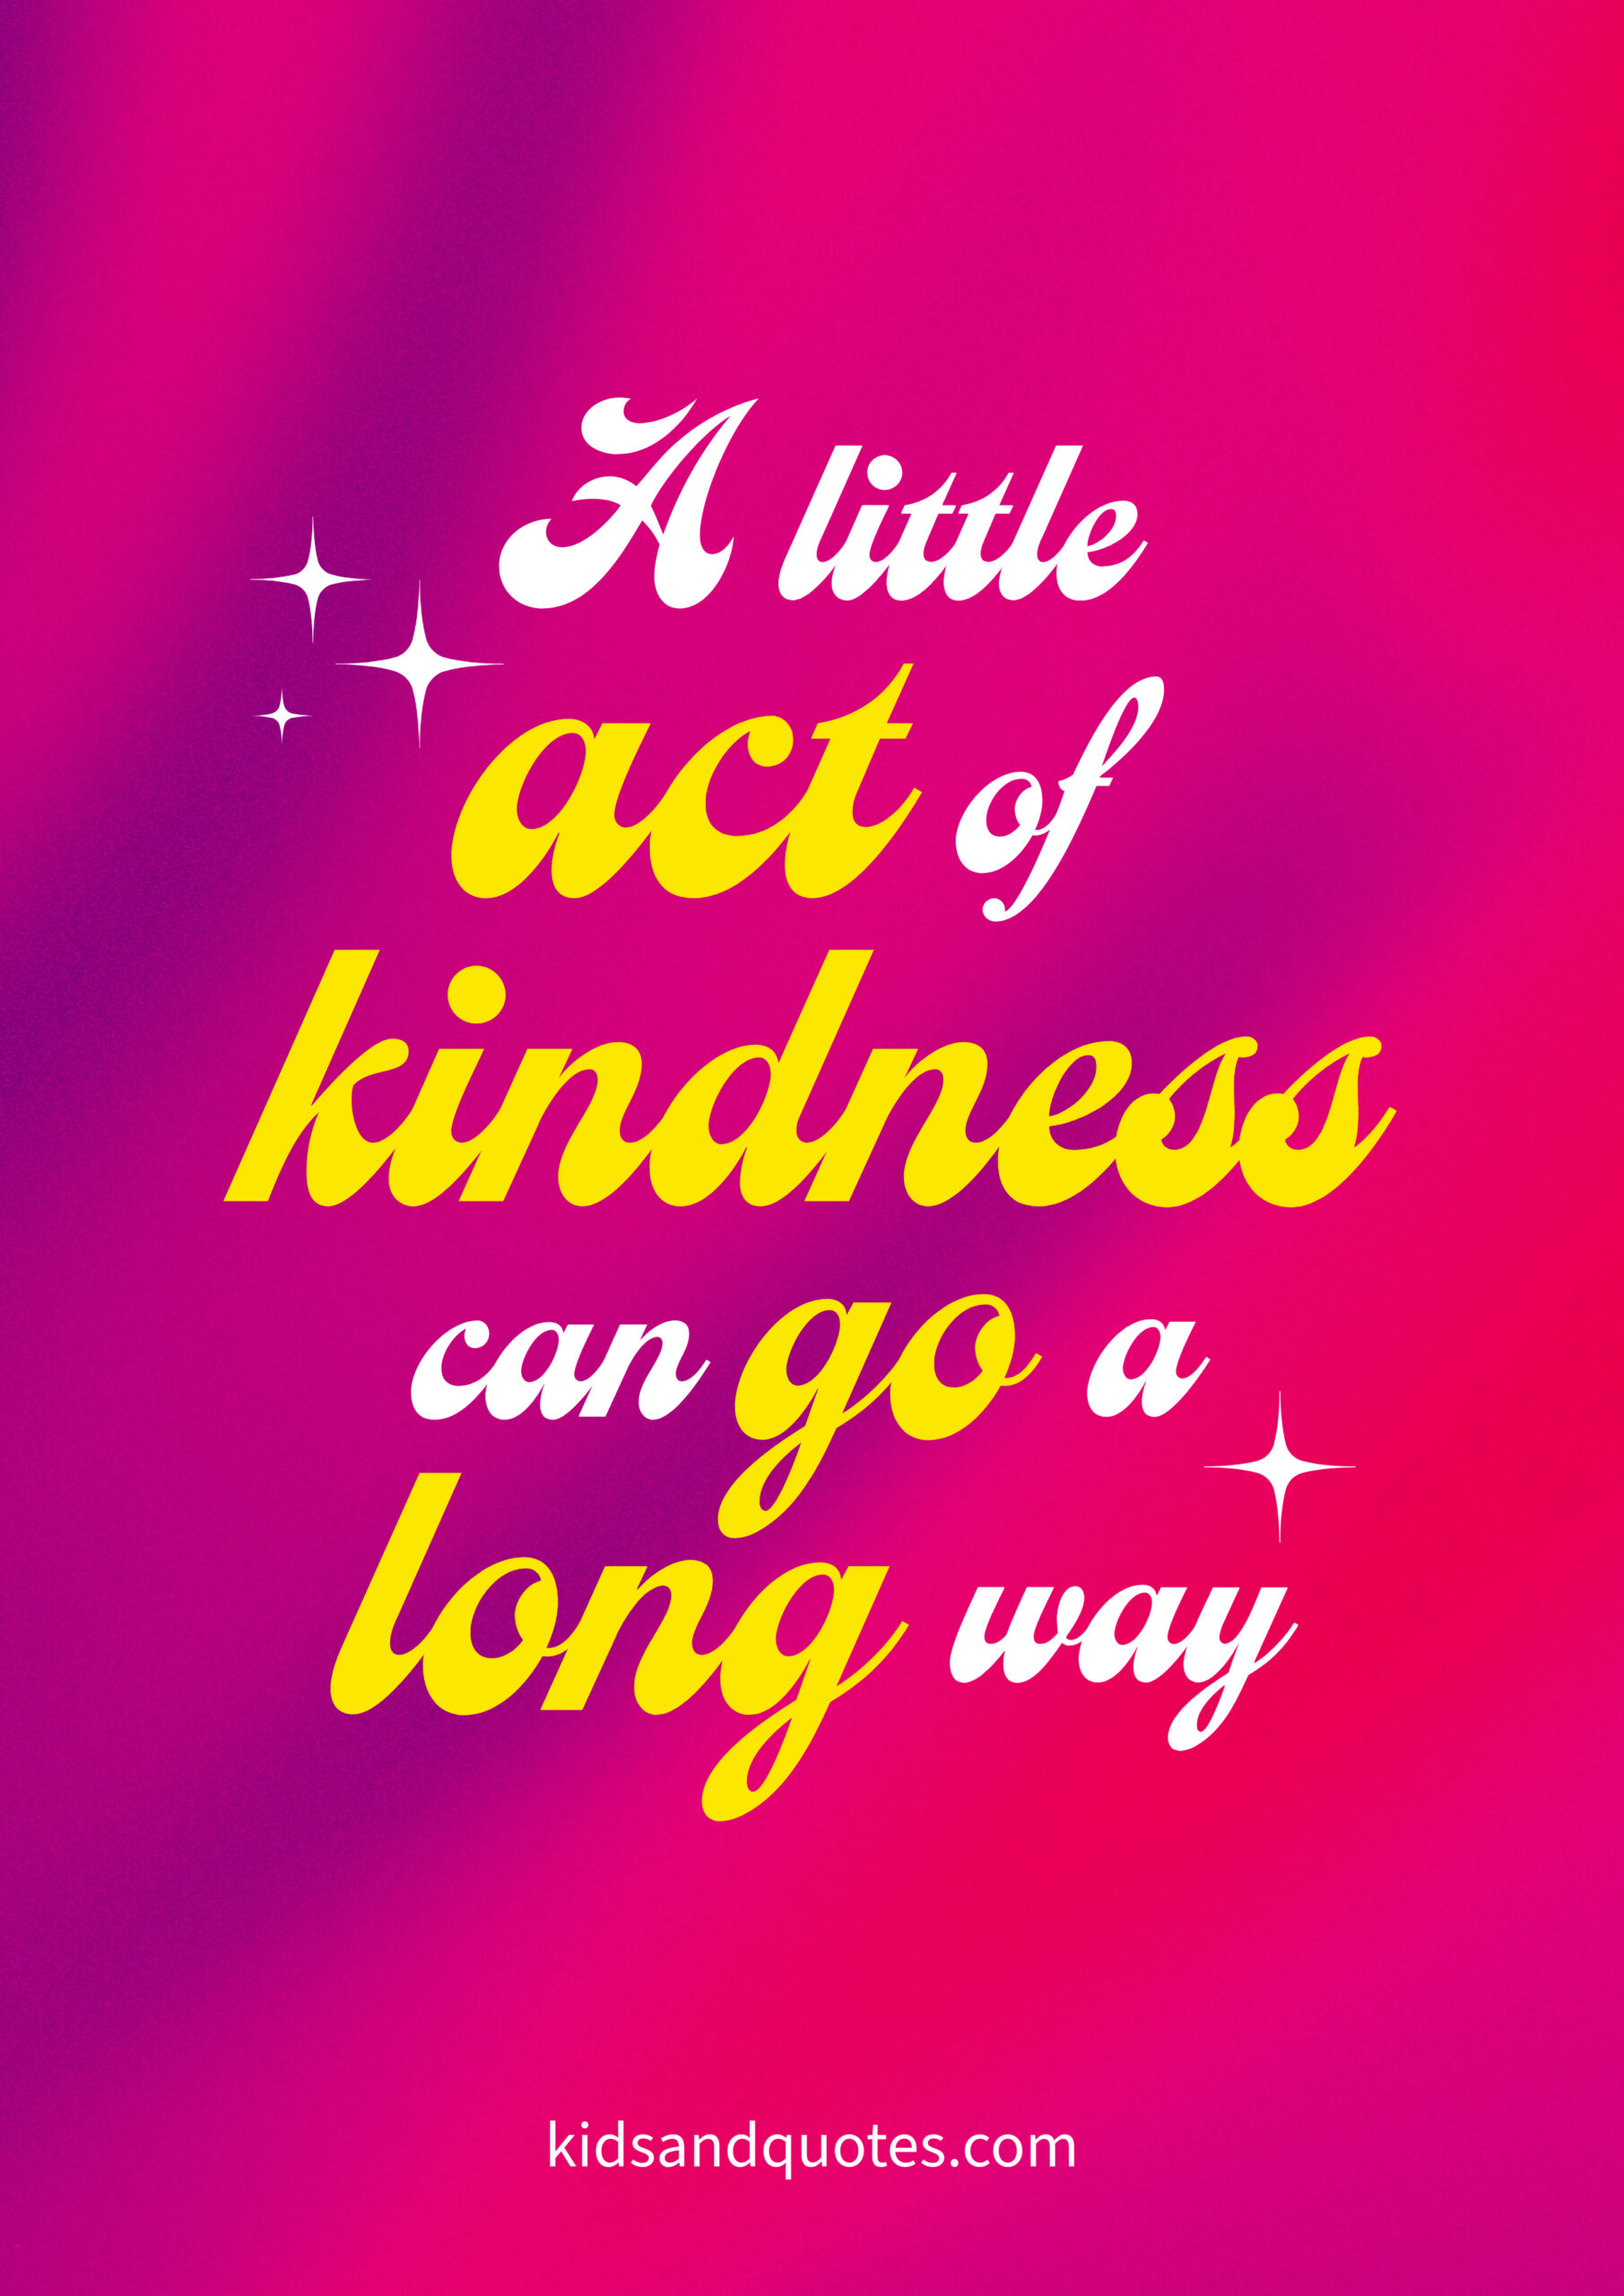 A little act of kindness can go a long way.